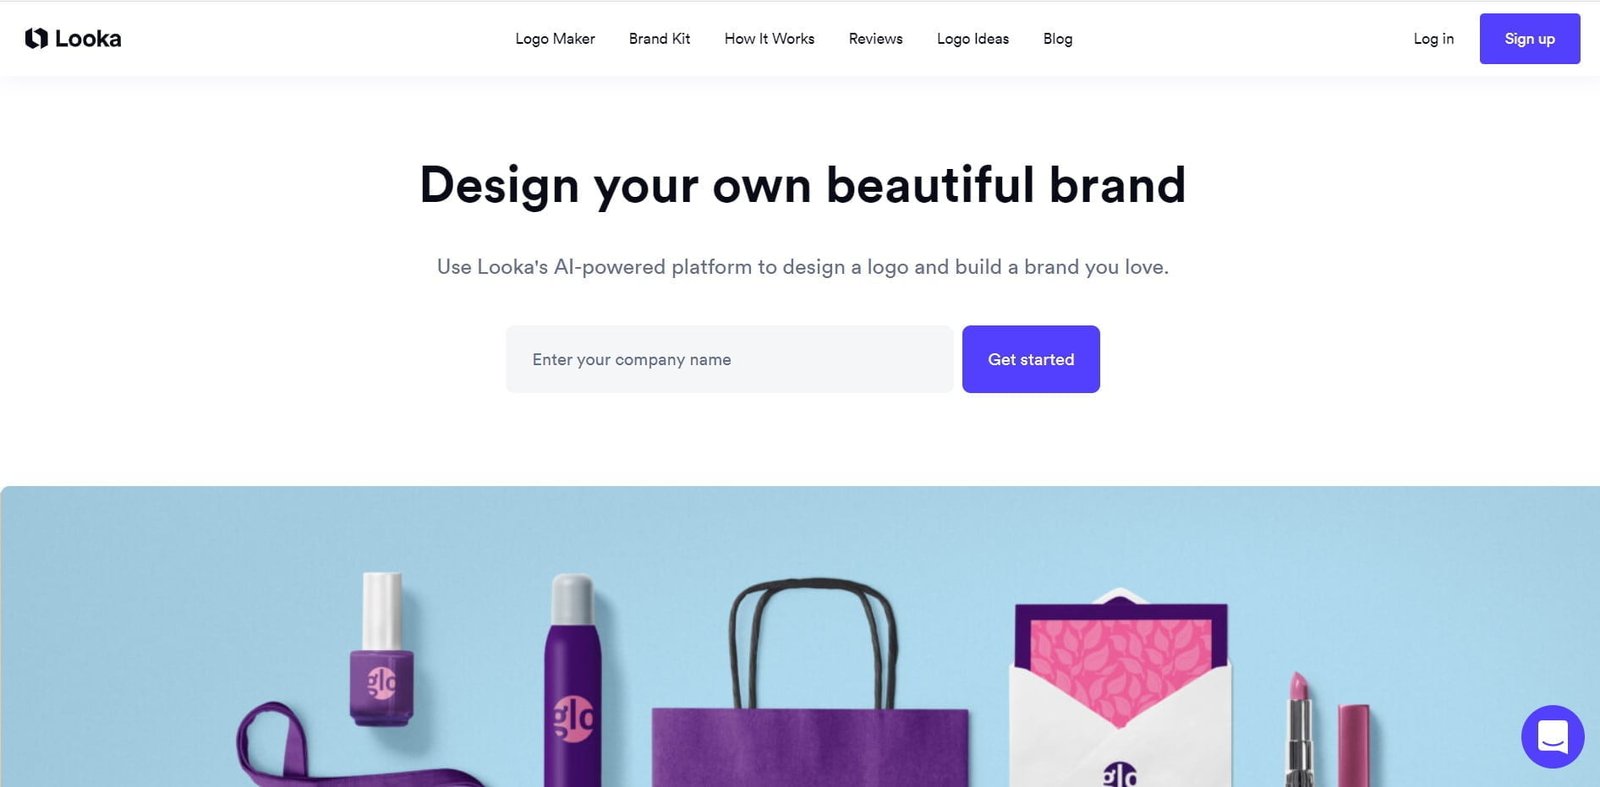 Looka is an AI-powered platform for logo design and branding